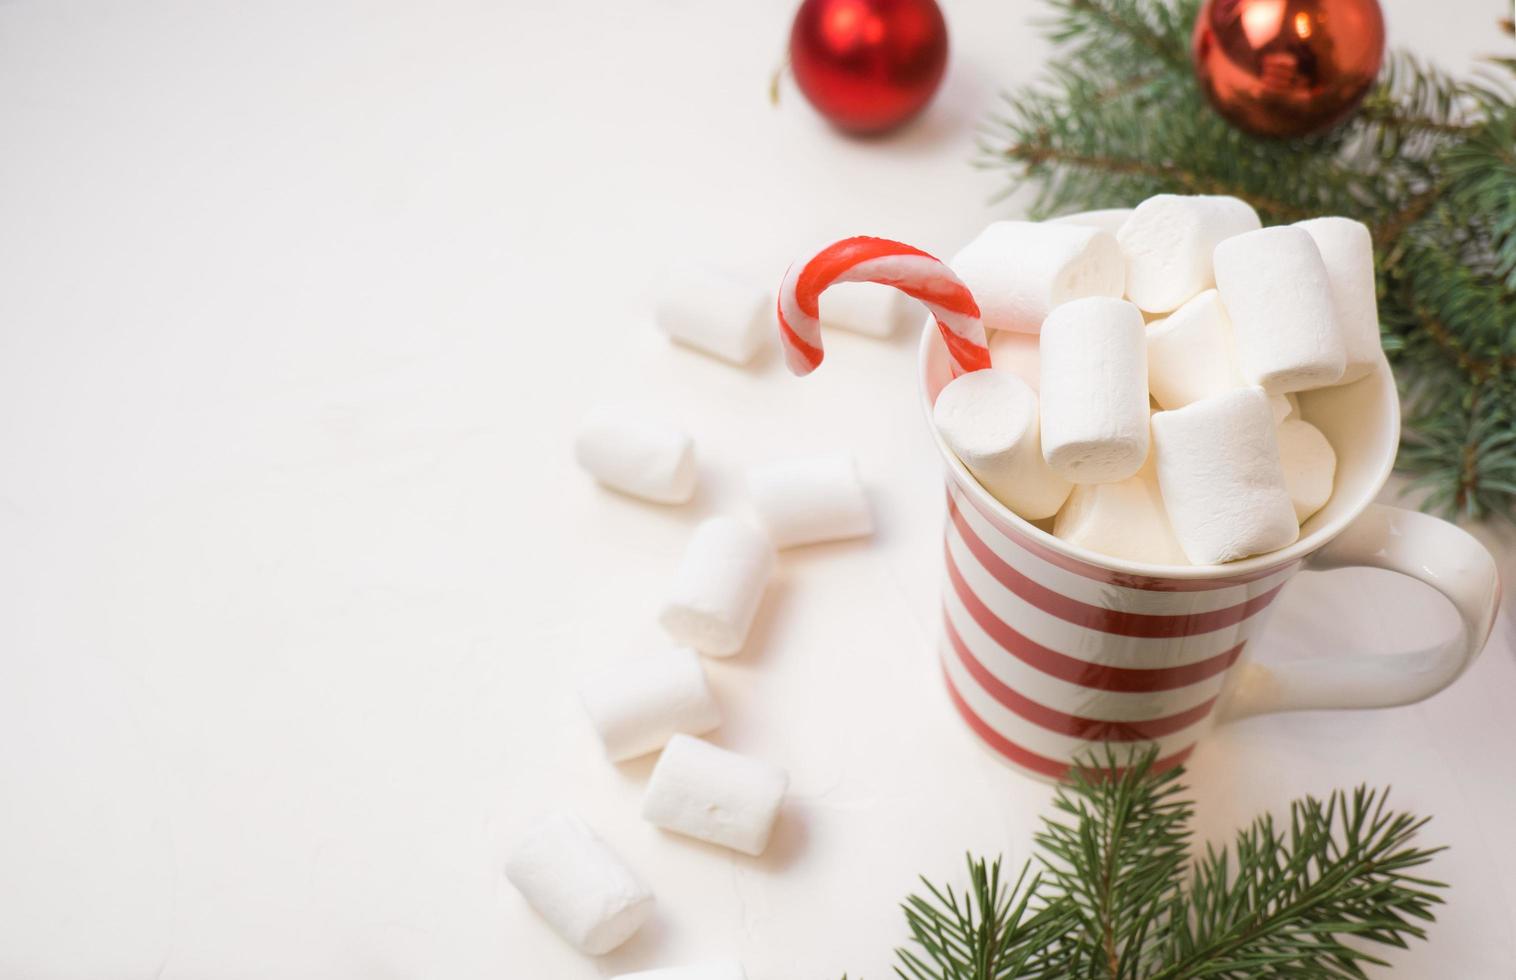 Traditional hot chocolate with marshmallows and lollipops on a white textured background. Christmas drink theme. photo